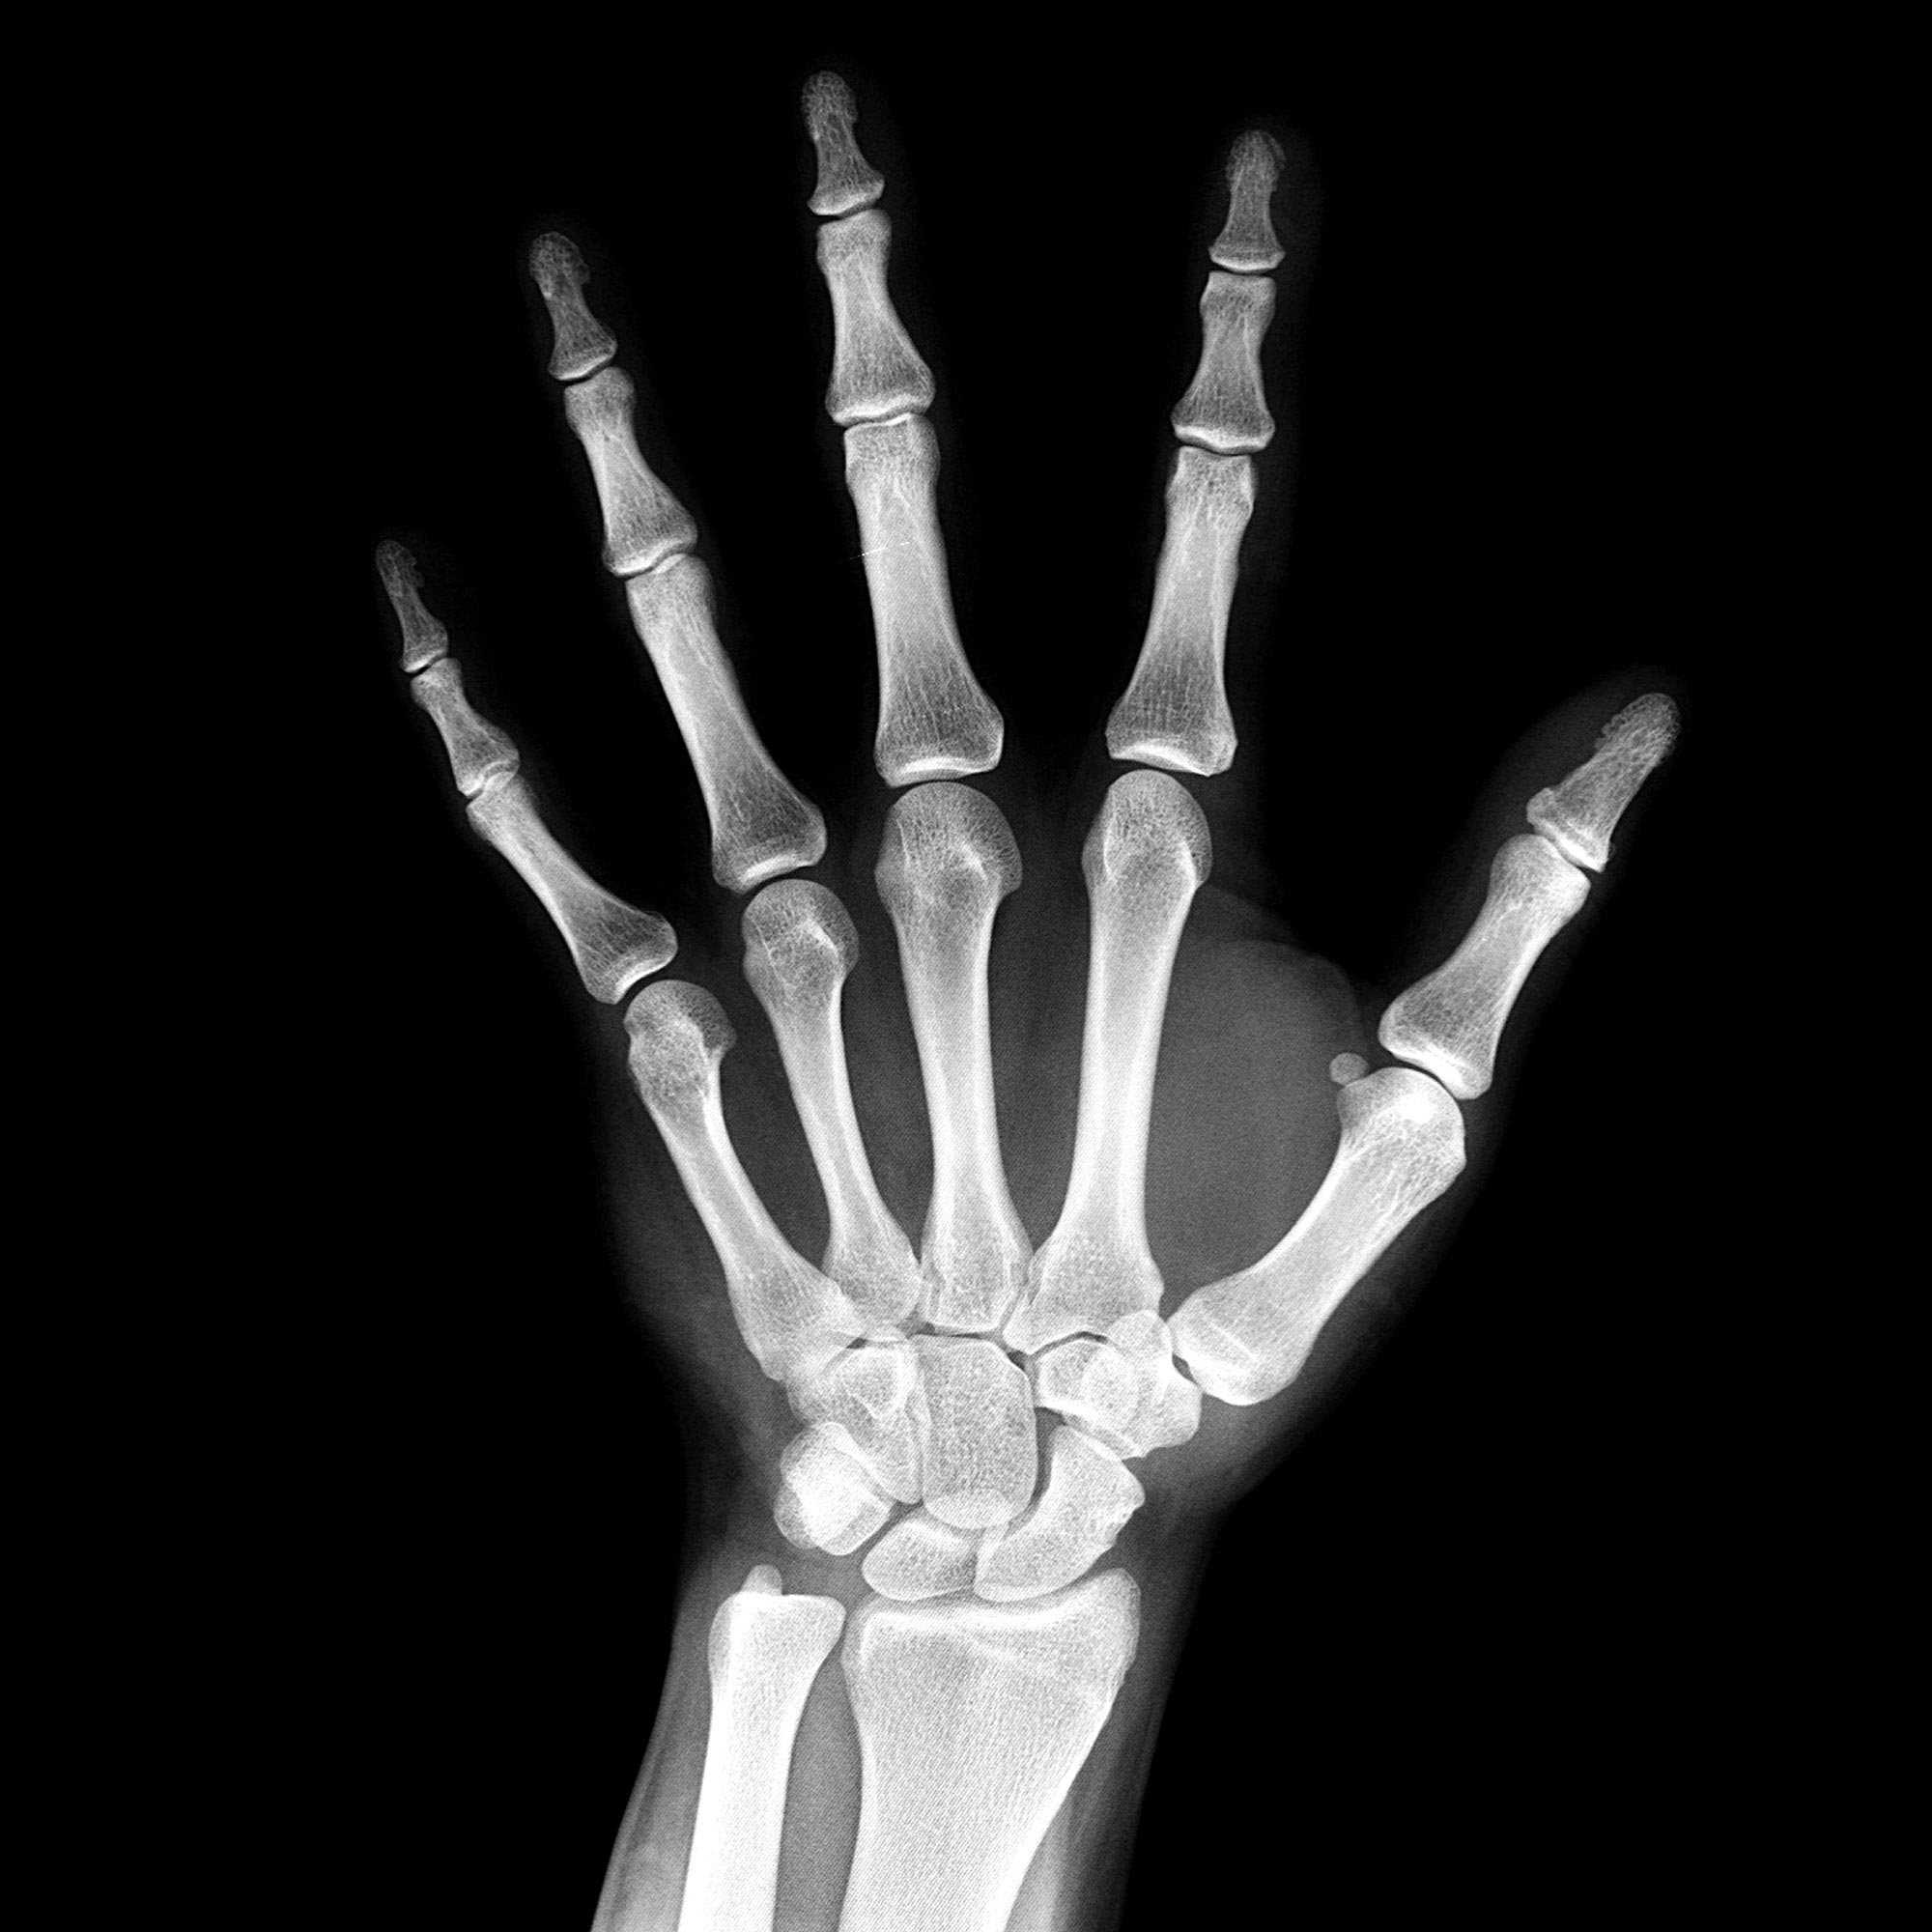 New Treatment Target Could Counter Bone Loss